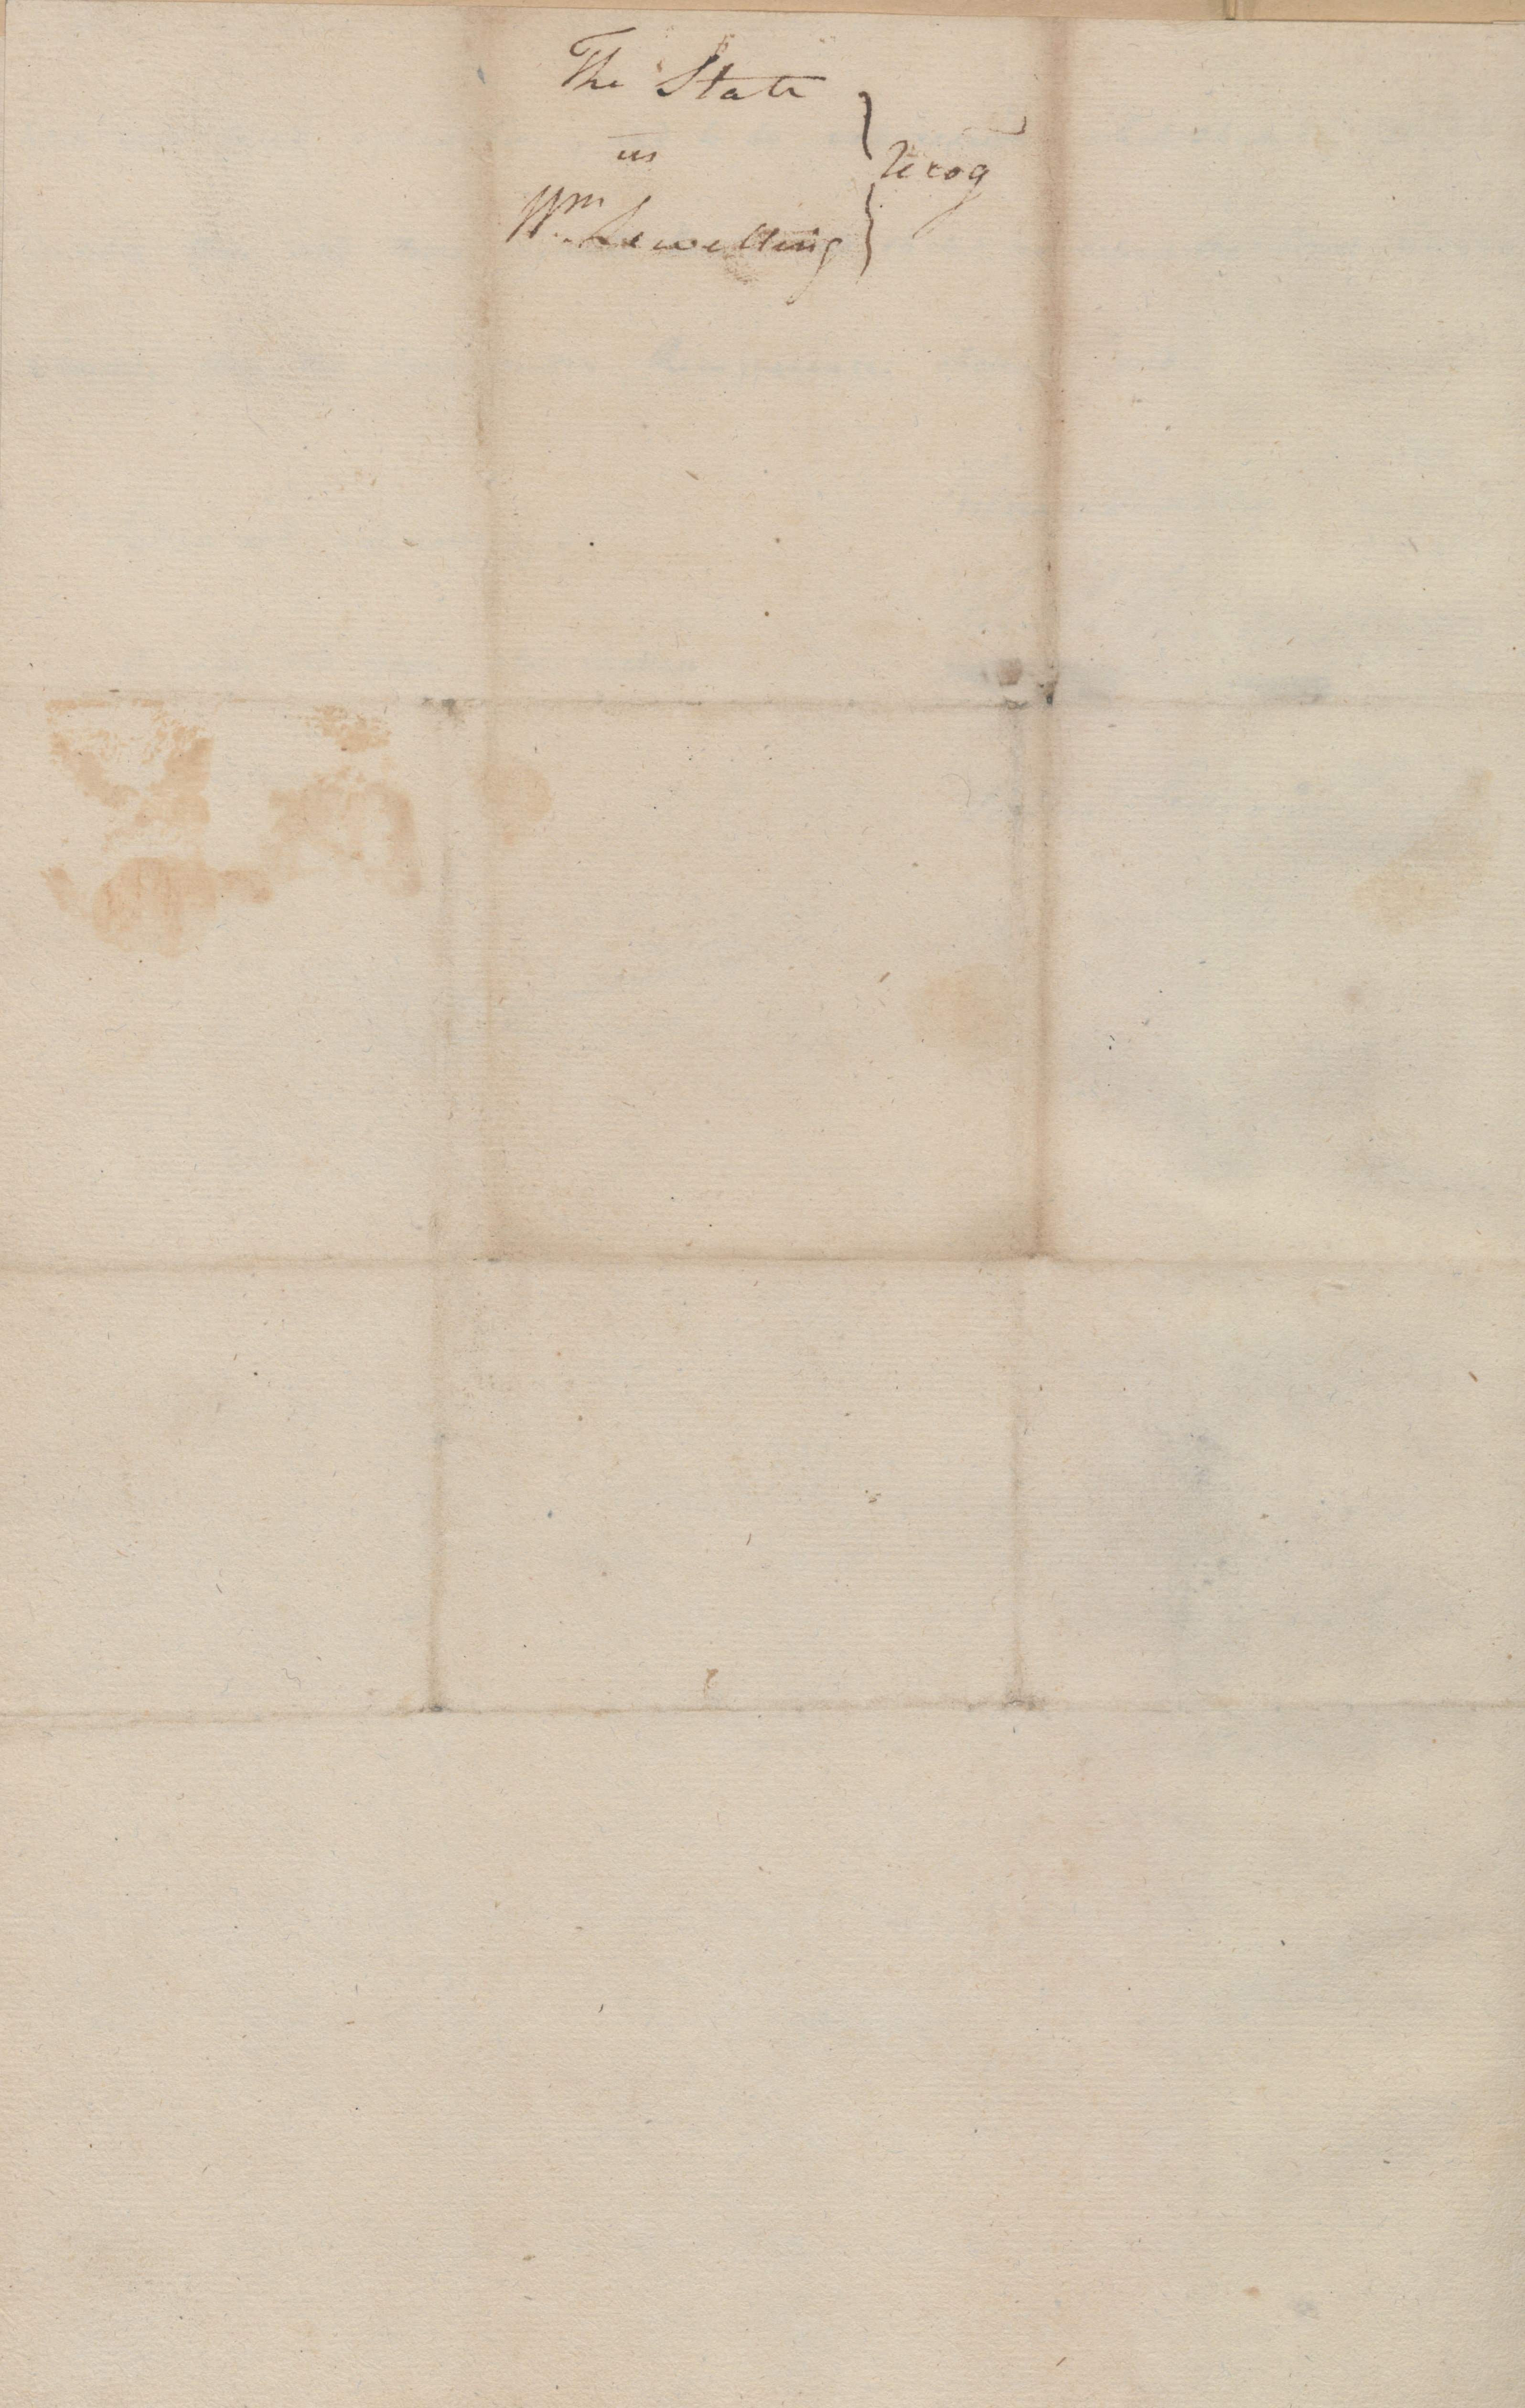 Bond from the Edenton District Court for William Lewellen, 10 October 1777, page 3